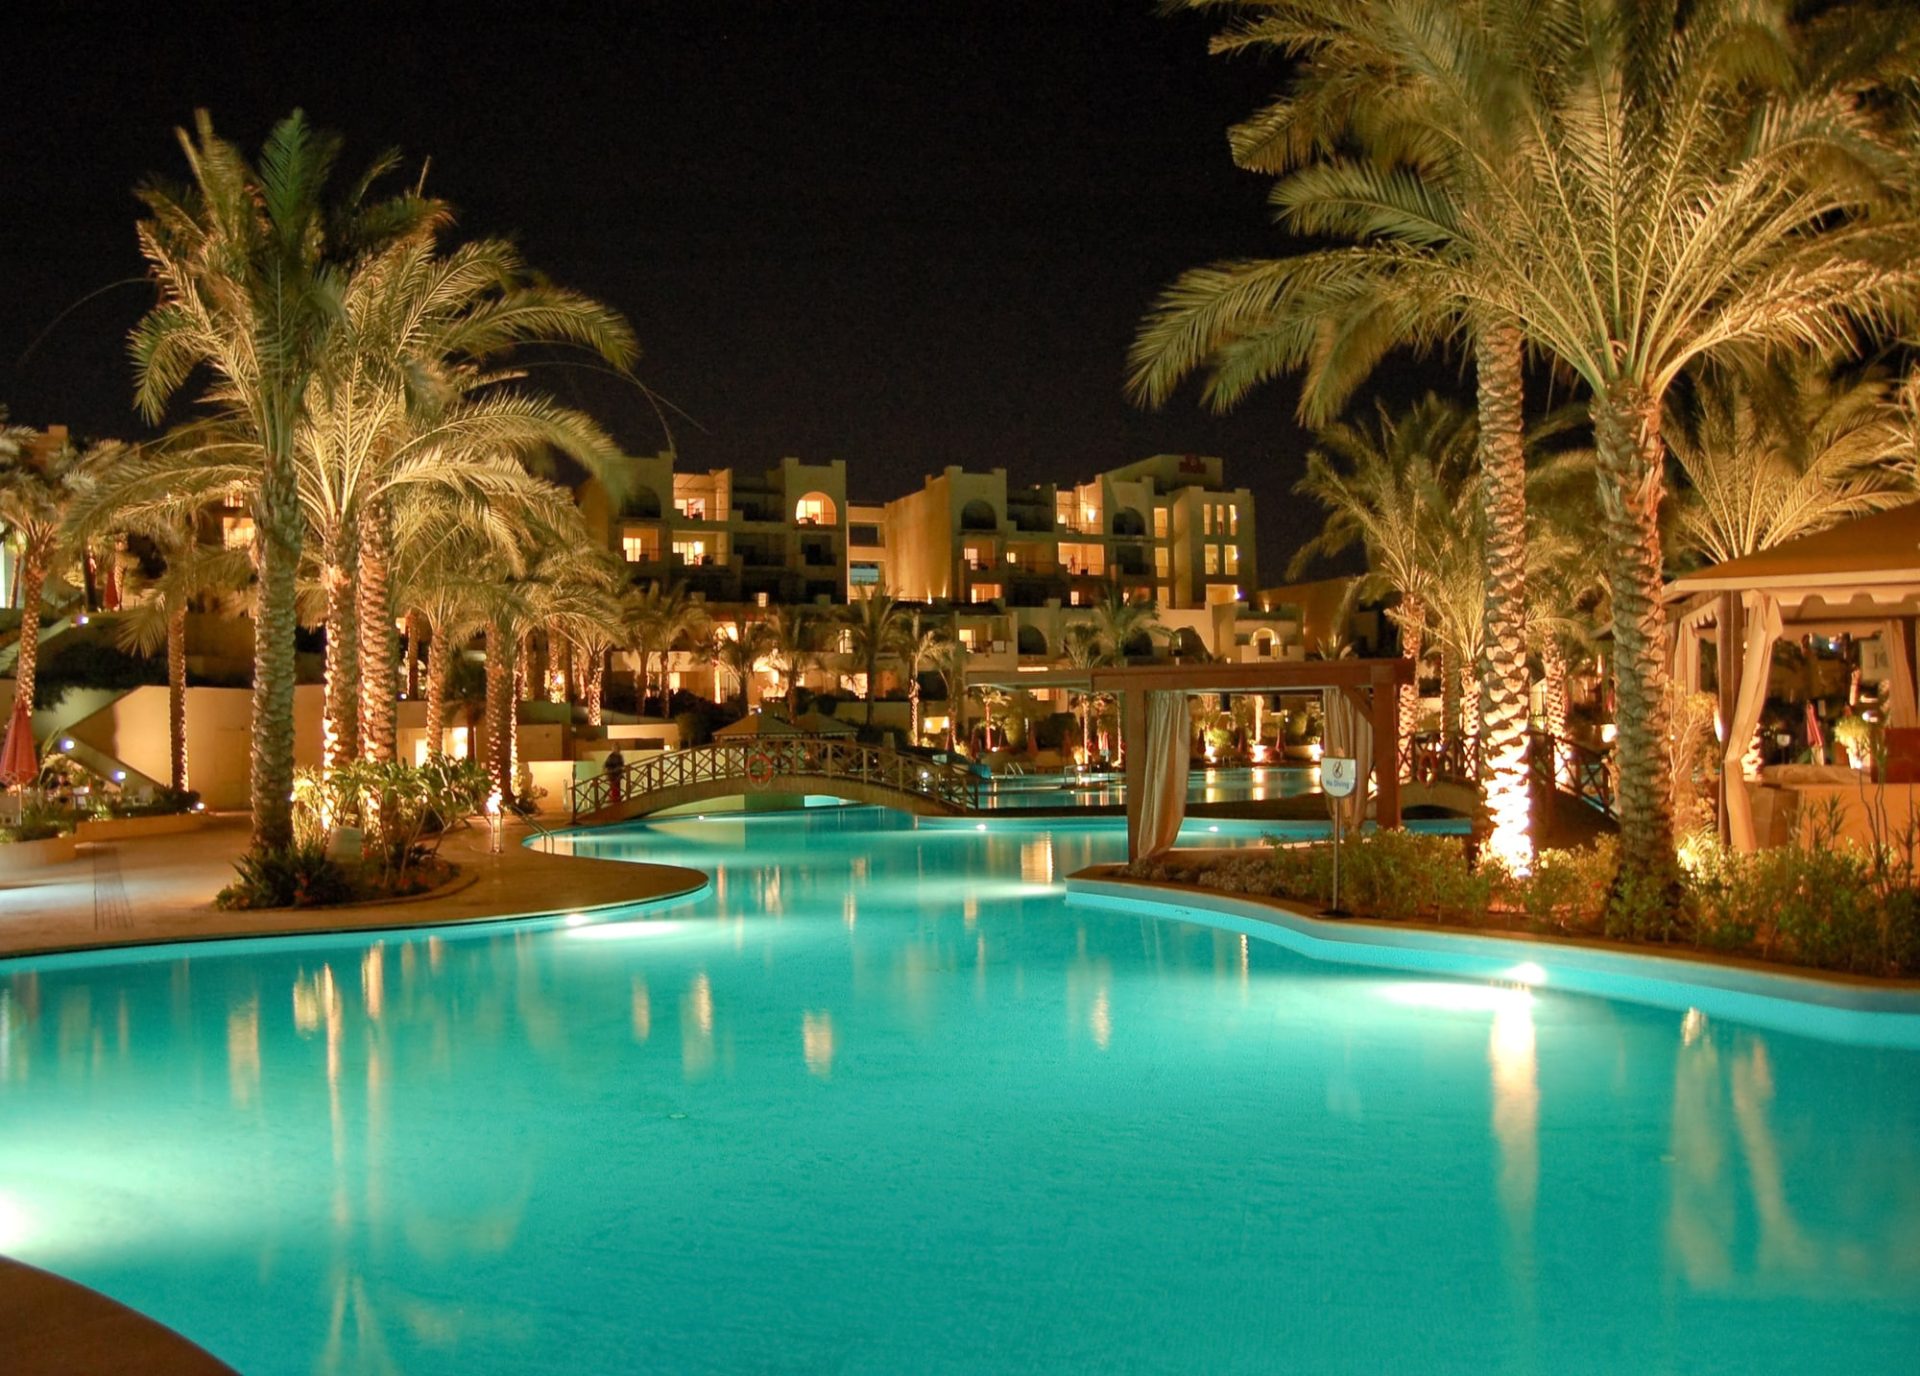 A luxurious hotel swimming pool at night with palm trees surrounding it.